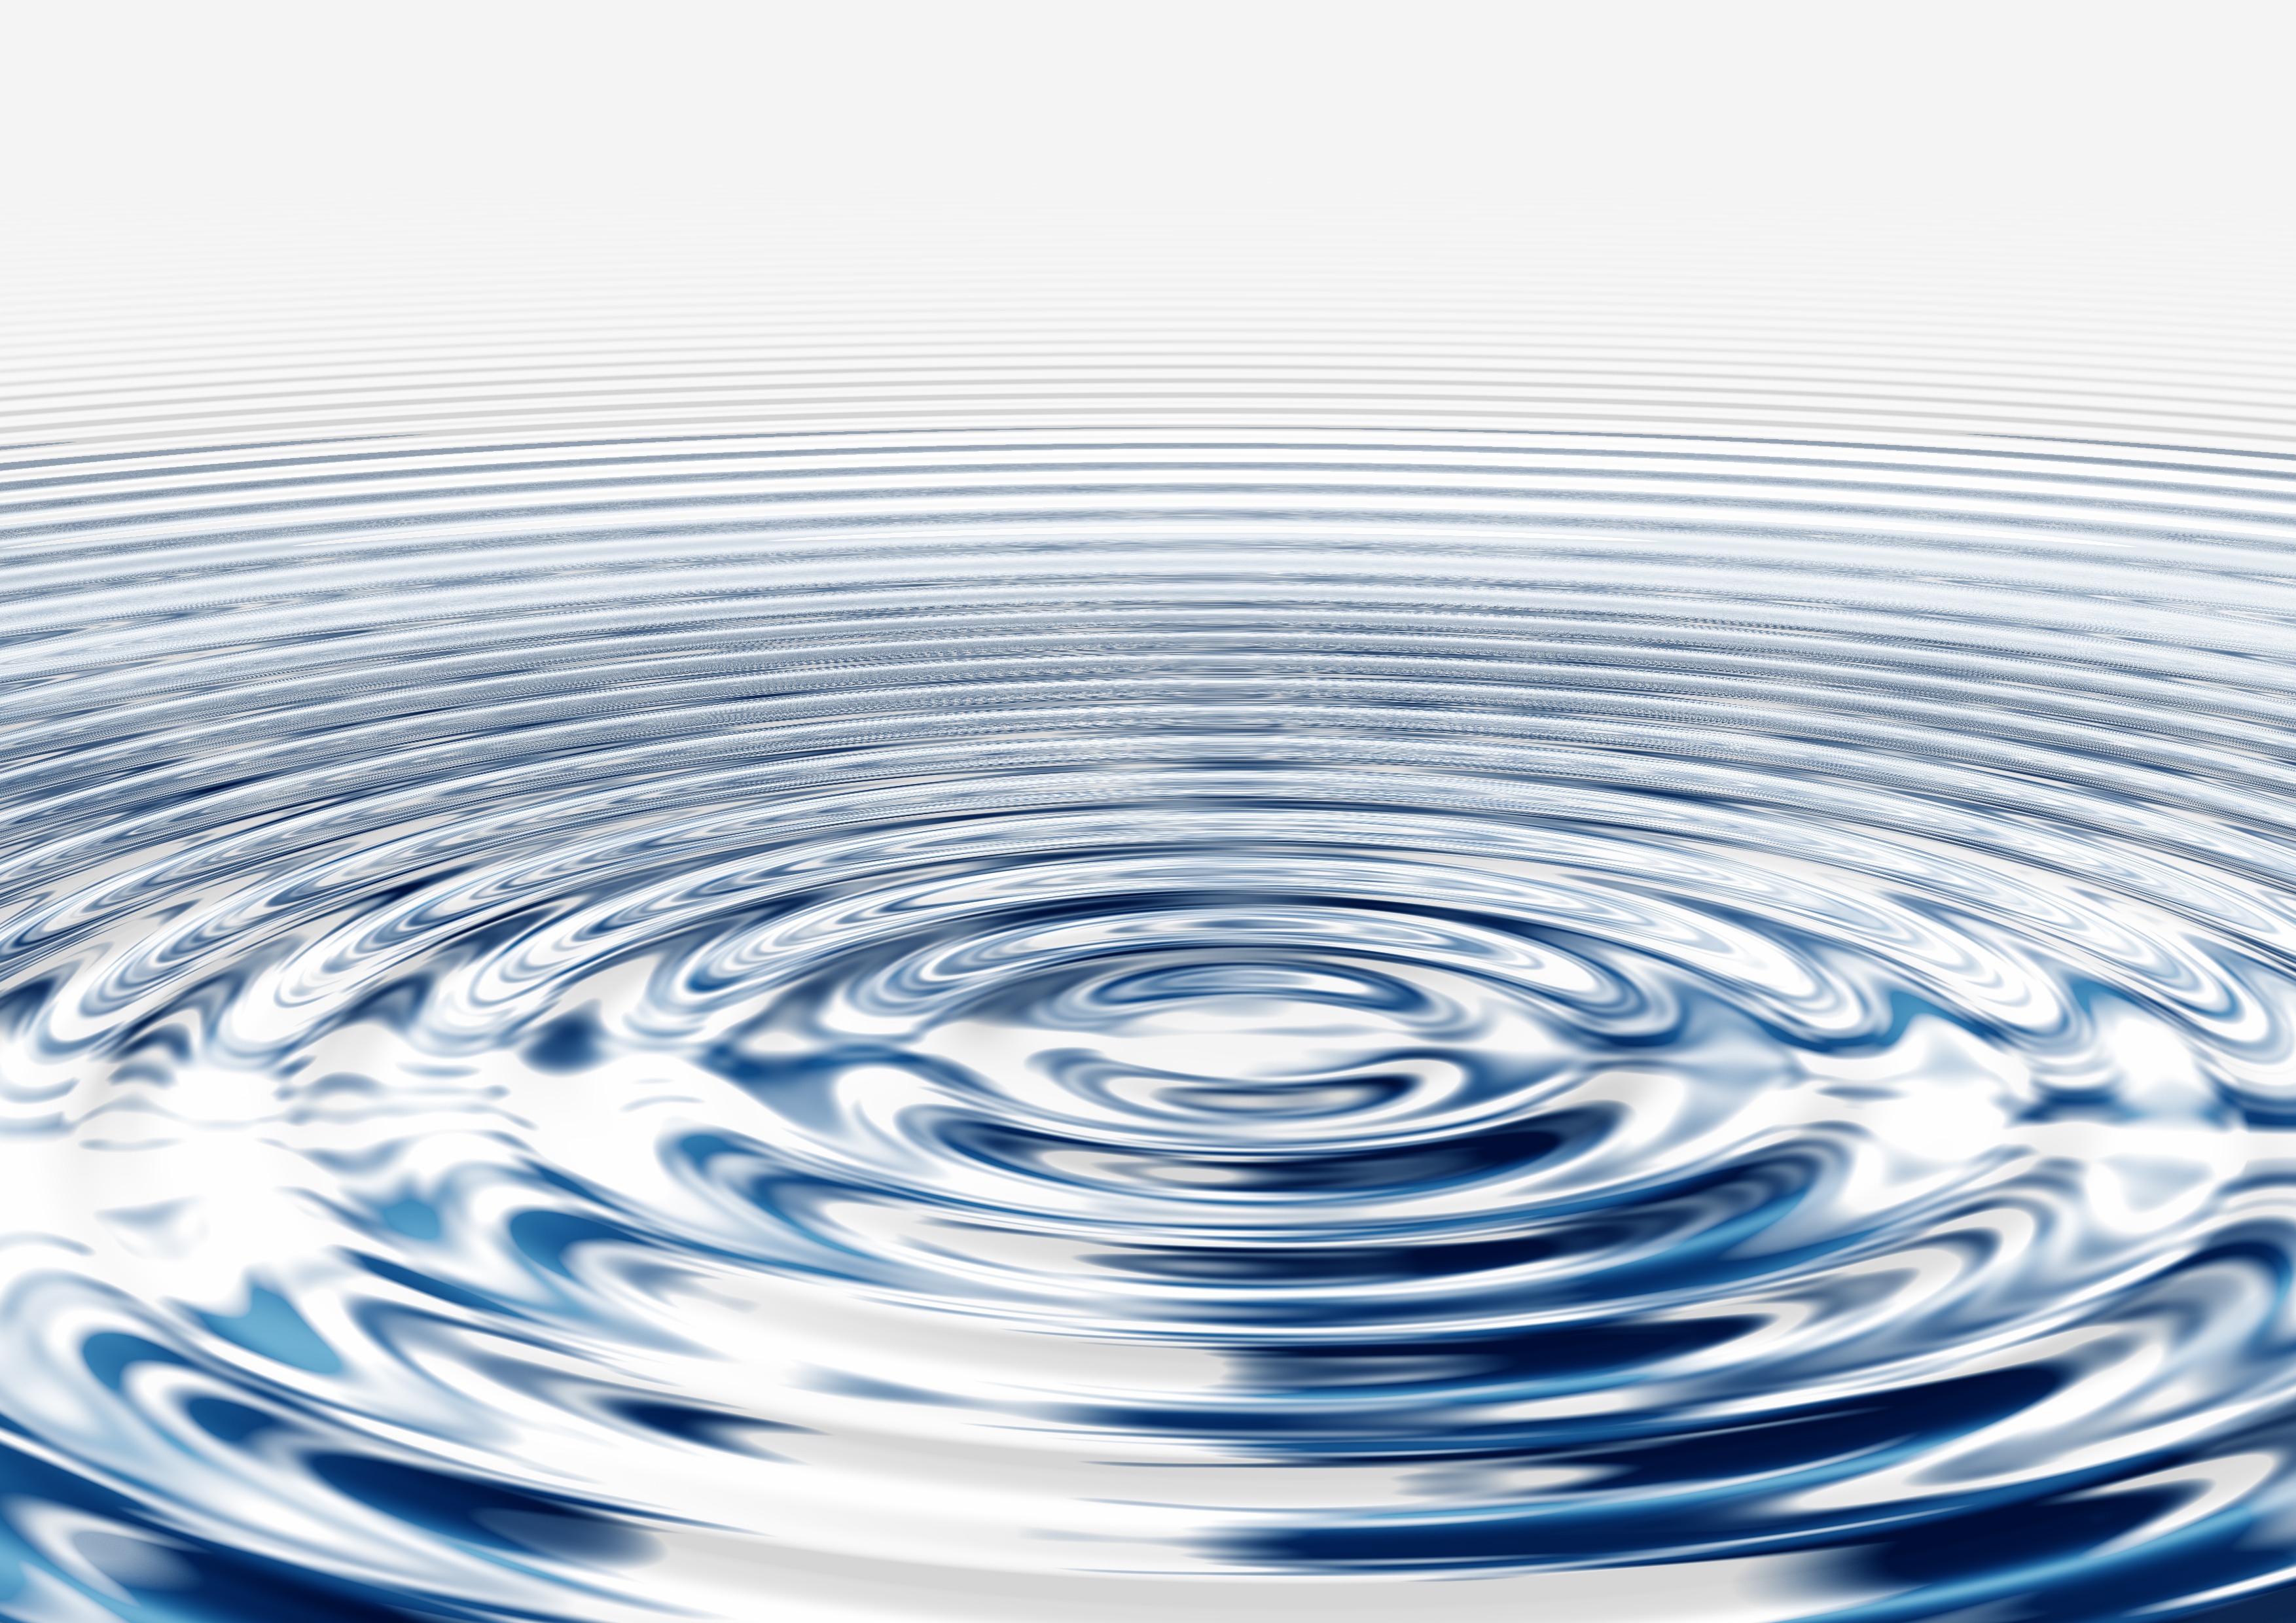 image of waves and ripples